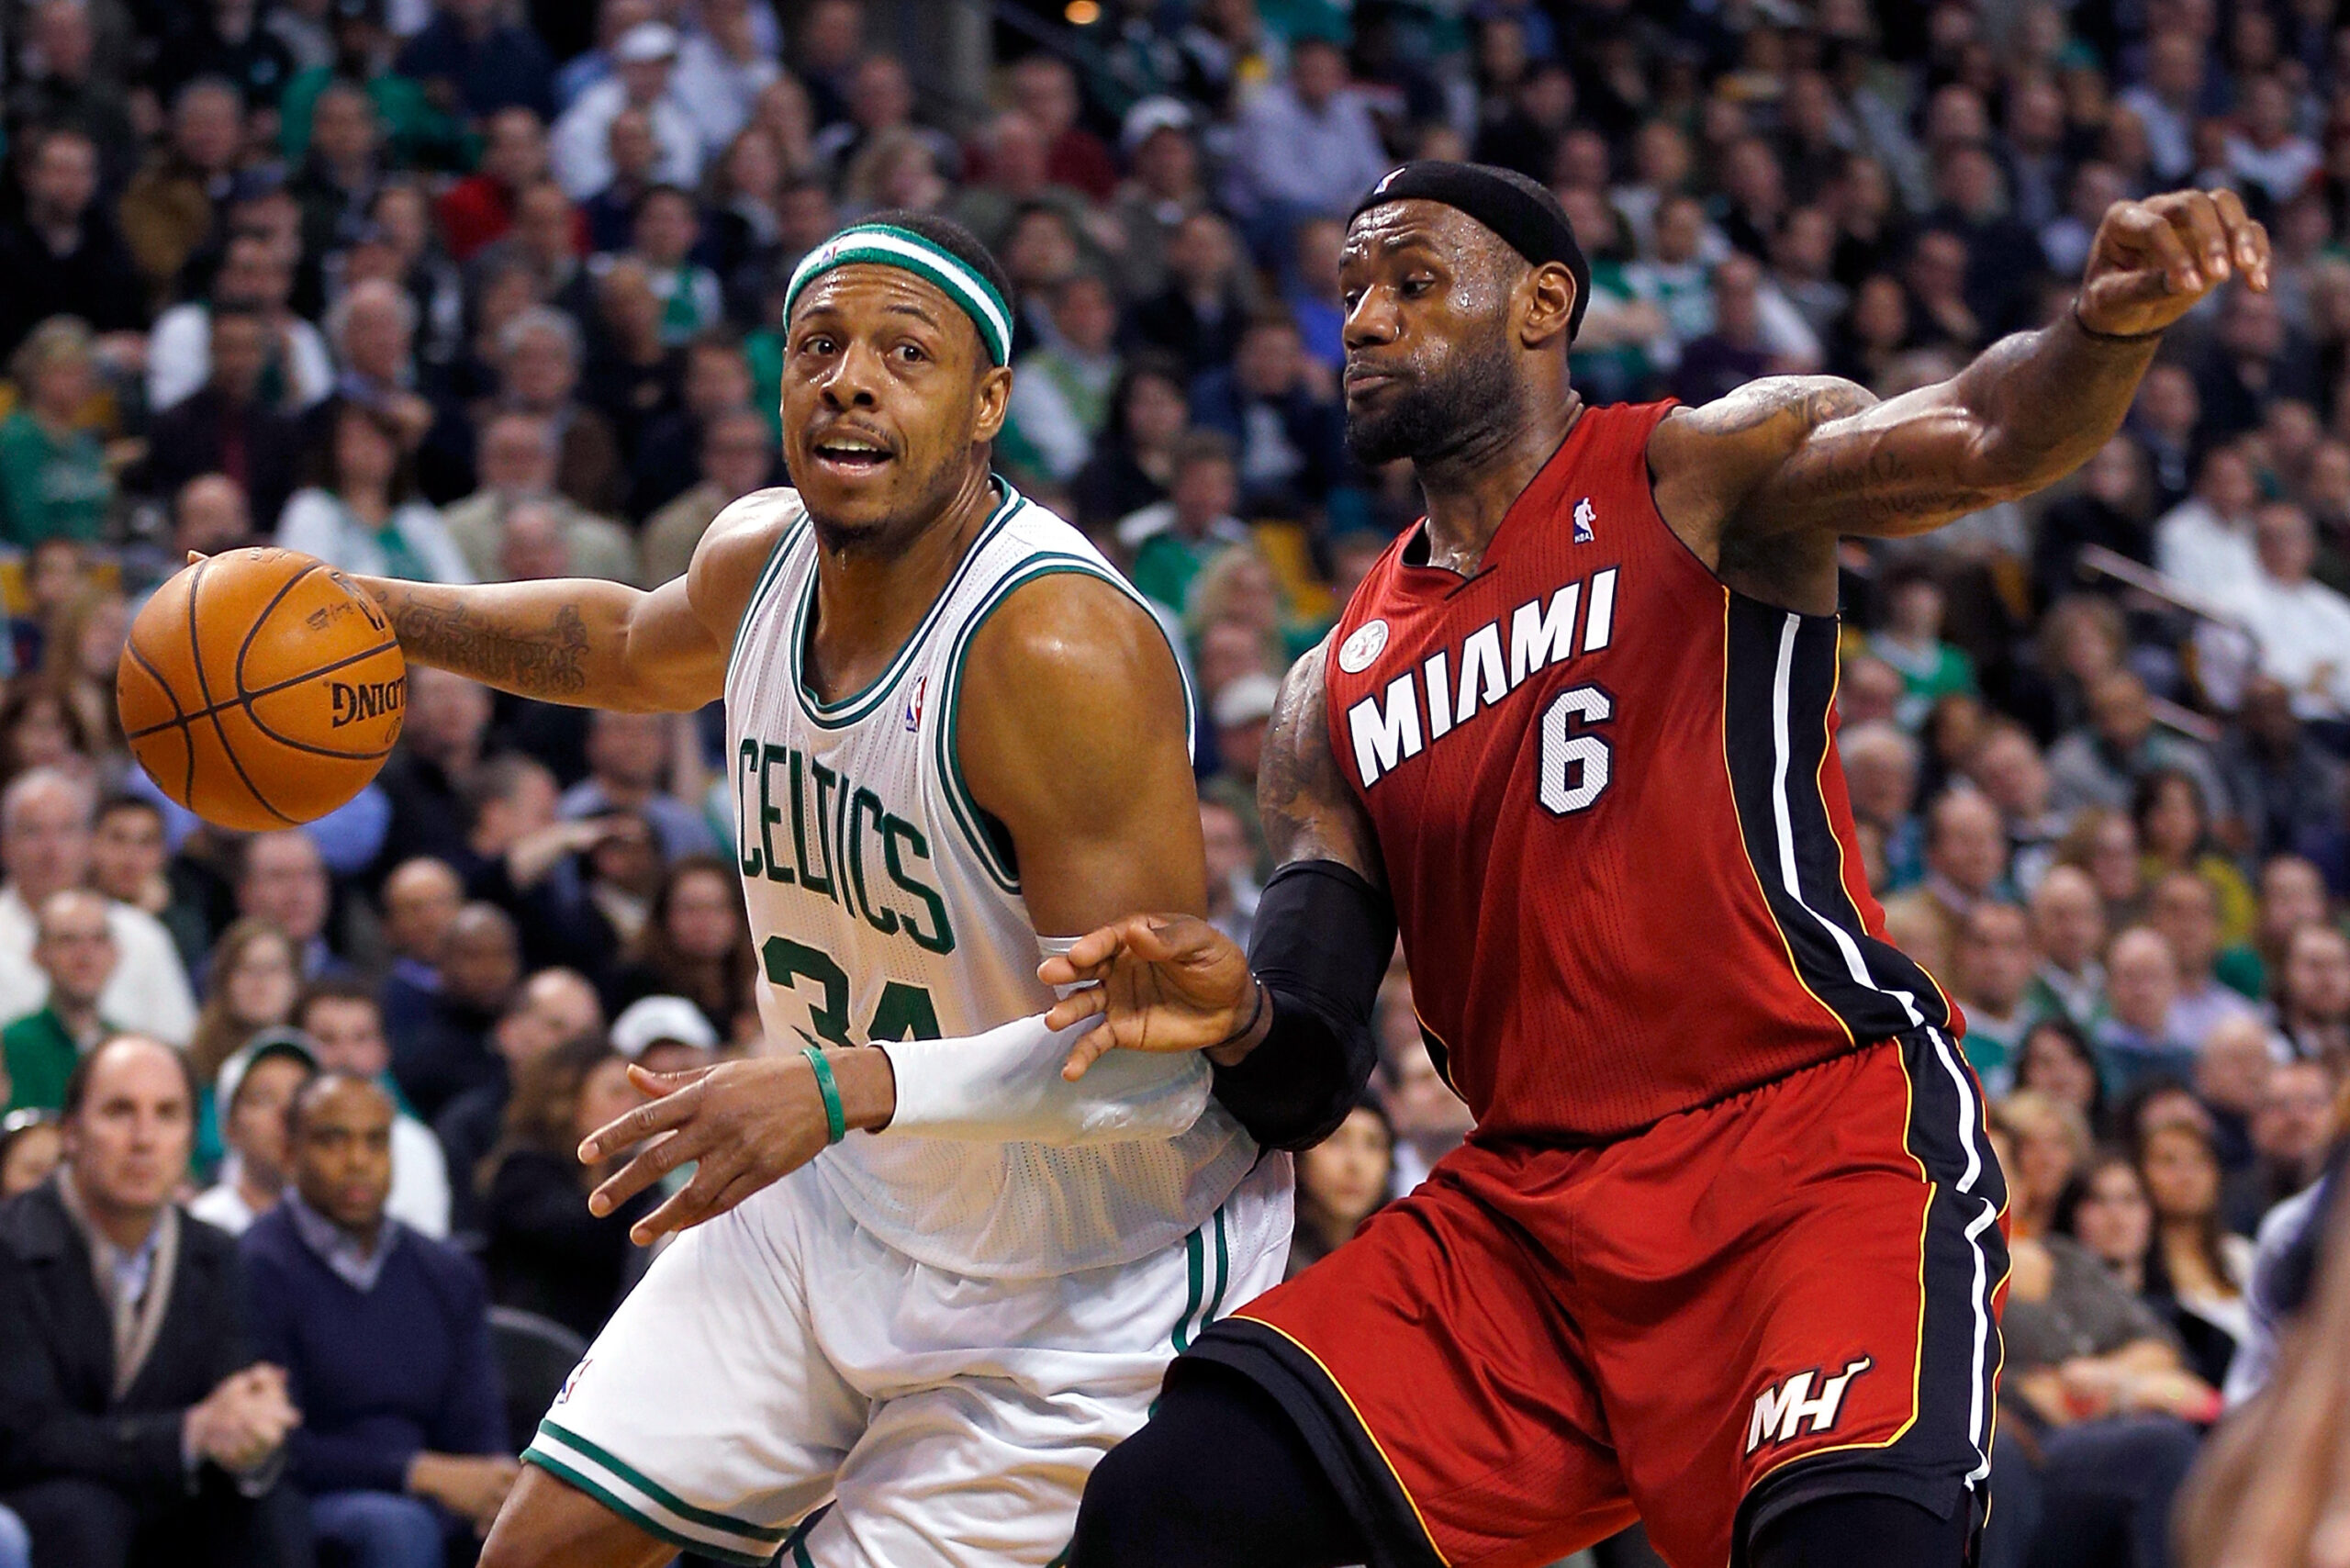 NBA News: "Who's the Most Difficult Player to Guard?", Paul Pierce selected Carmelo Anthony over Kobe Bryant and LeBron James